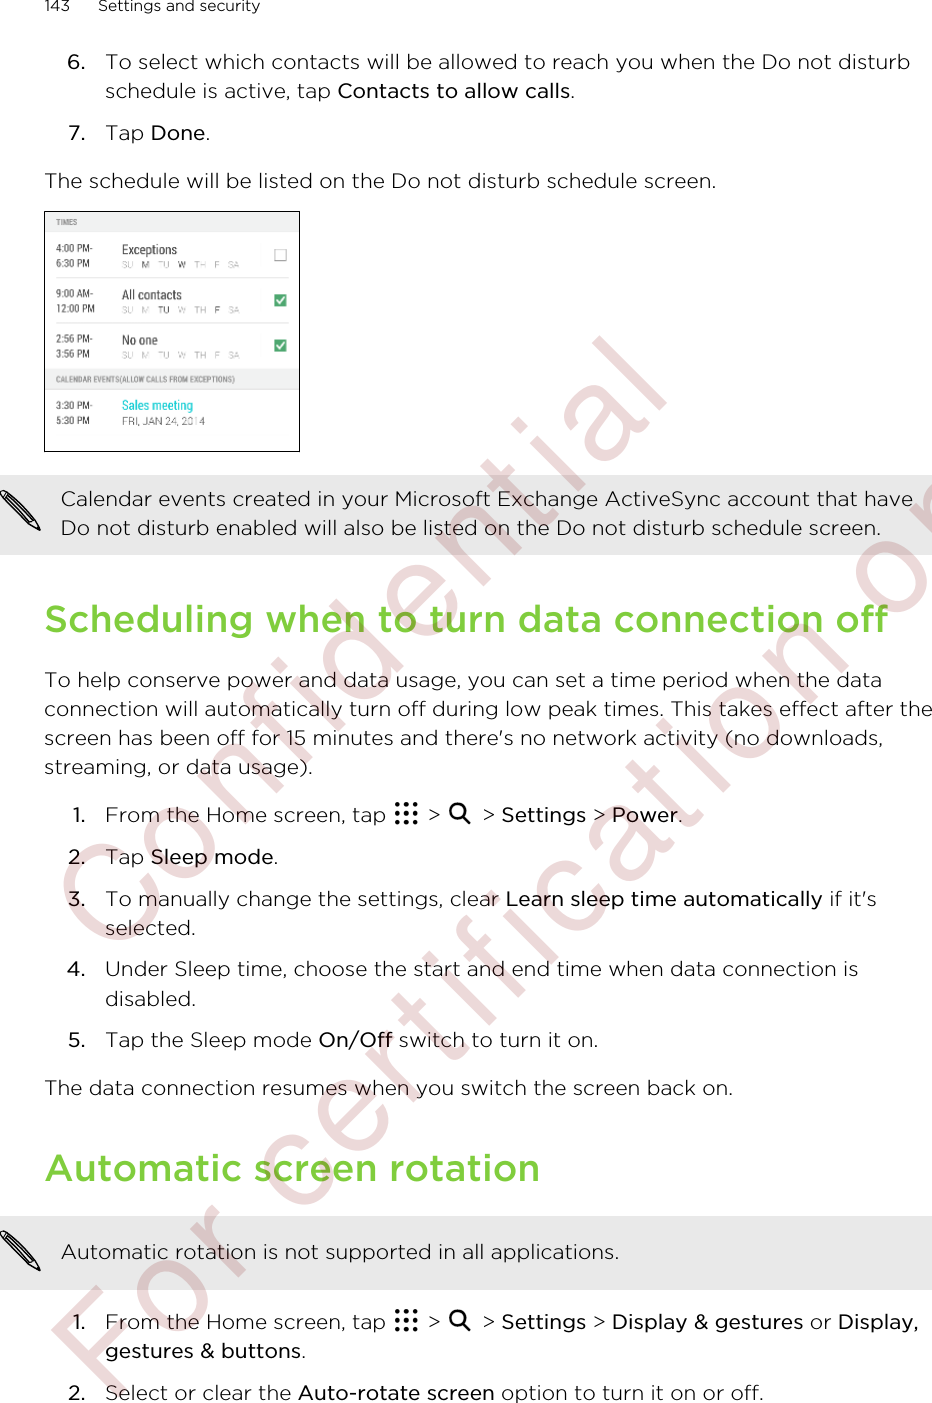 6. To select which contacts will be allowed to reach you when the Do not disturbschedule is active, tap Contacts to allow calls.7. Tap Done.The schedule will be listed on the Do not disturb schedule screen.Calendar events created in your Microsoft Exchange ActiveSync account that haveDo not disturb enabled will also be listed on the Do not disturb schedule screen.Scheduling when to turn data connection offTo help conserve power and data usage, you can set a time period when the dataconnection will automatically turn off during low peak times. This takes effect after thescreen has been off for 15 minutes and there&apos;s no network activity (no downloads,streaming, or data usage).1. From the Home screen, tap   &gt;   &gt; Settings &gt; Power.2. Tap Sleep mode.3. To manually change the settings, clear Learn sleep time automatically if it&apos;sselected.4. Under Sleep time, choose the start and end time when data connection isdisabled.5. Tap the Sleep mode On/Off switch to turn it on.The data connection resumes when you switch the screen back on.Automatic screen rotationAutomatic rotation is not supported in all applications.1. From the Home screen, tap   &gt;   &gt; Settings &gt; Display &amp; gestures or Display,gestures &amp; buttons.2. Select or clear the Auto-rotate screen option to turn it on or off.143 Settings and security        Confident ial  For cert ificat ion only